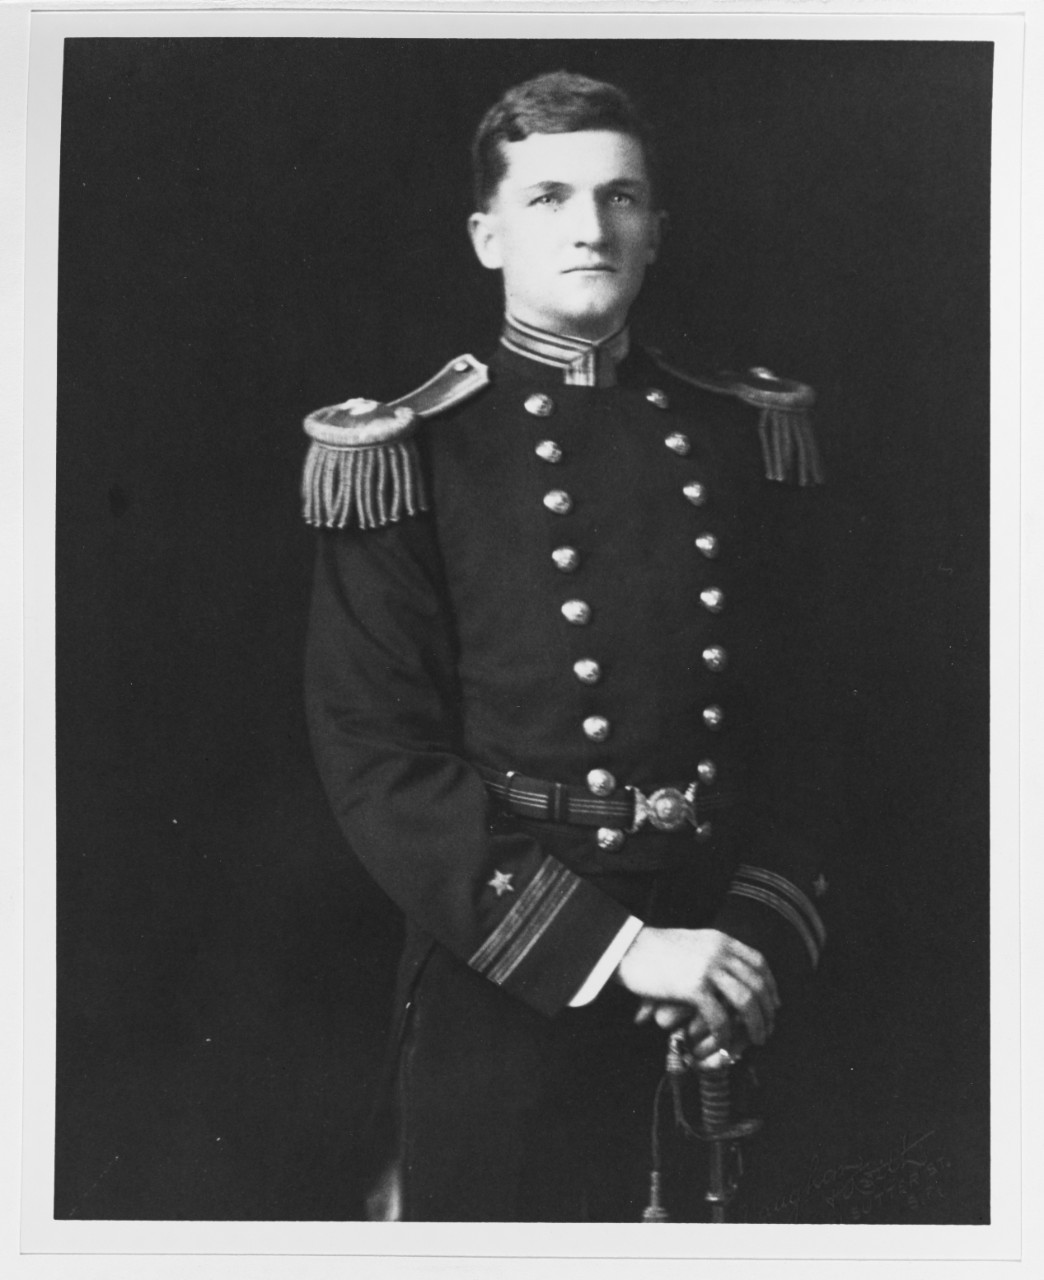 A portrait photograph captures a youthful Stark, probably taken when his ship, Minnesota, visits San Francisco, Calif., in 1908, during the Great White Fleet’s World cruise. Photographed by Vaughan & Keith of San Francisco. (Collection of Adm. Ha...